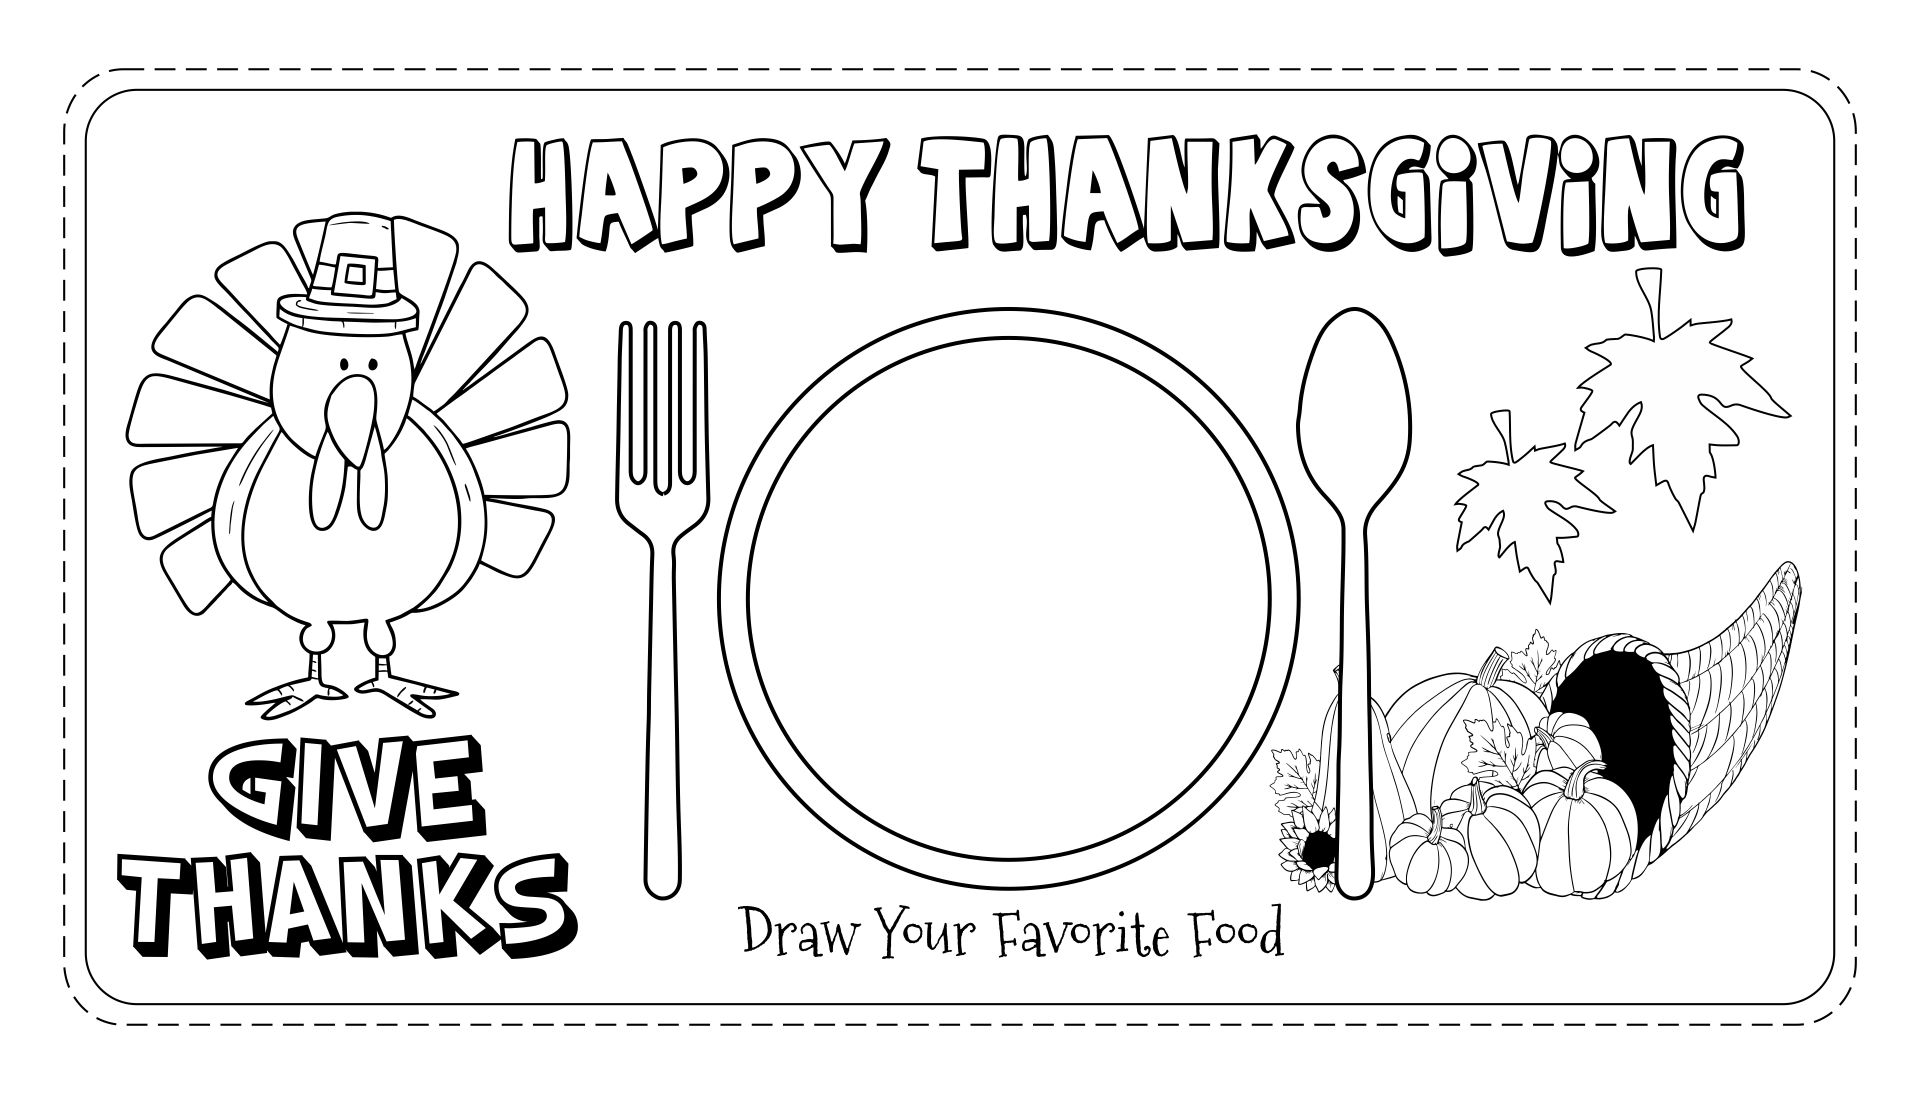 Printable Placemats for Kids to Color